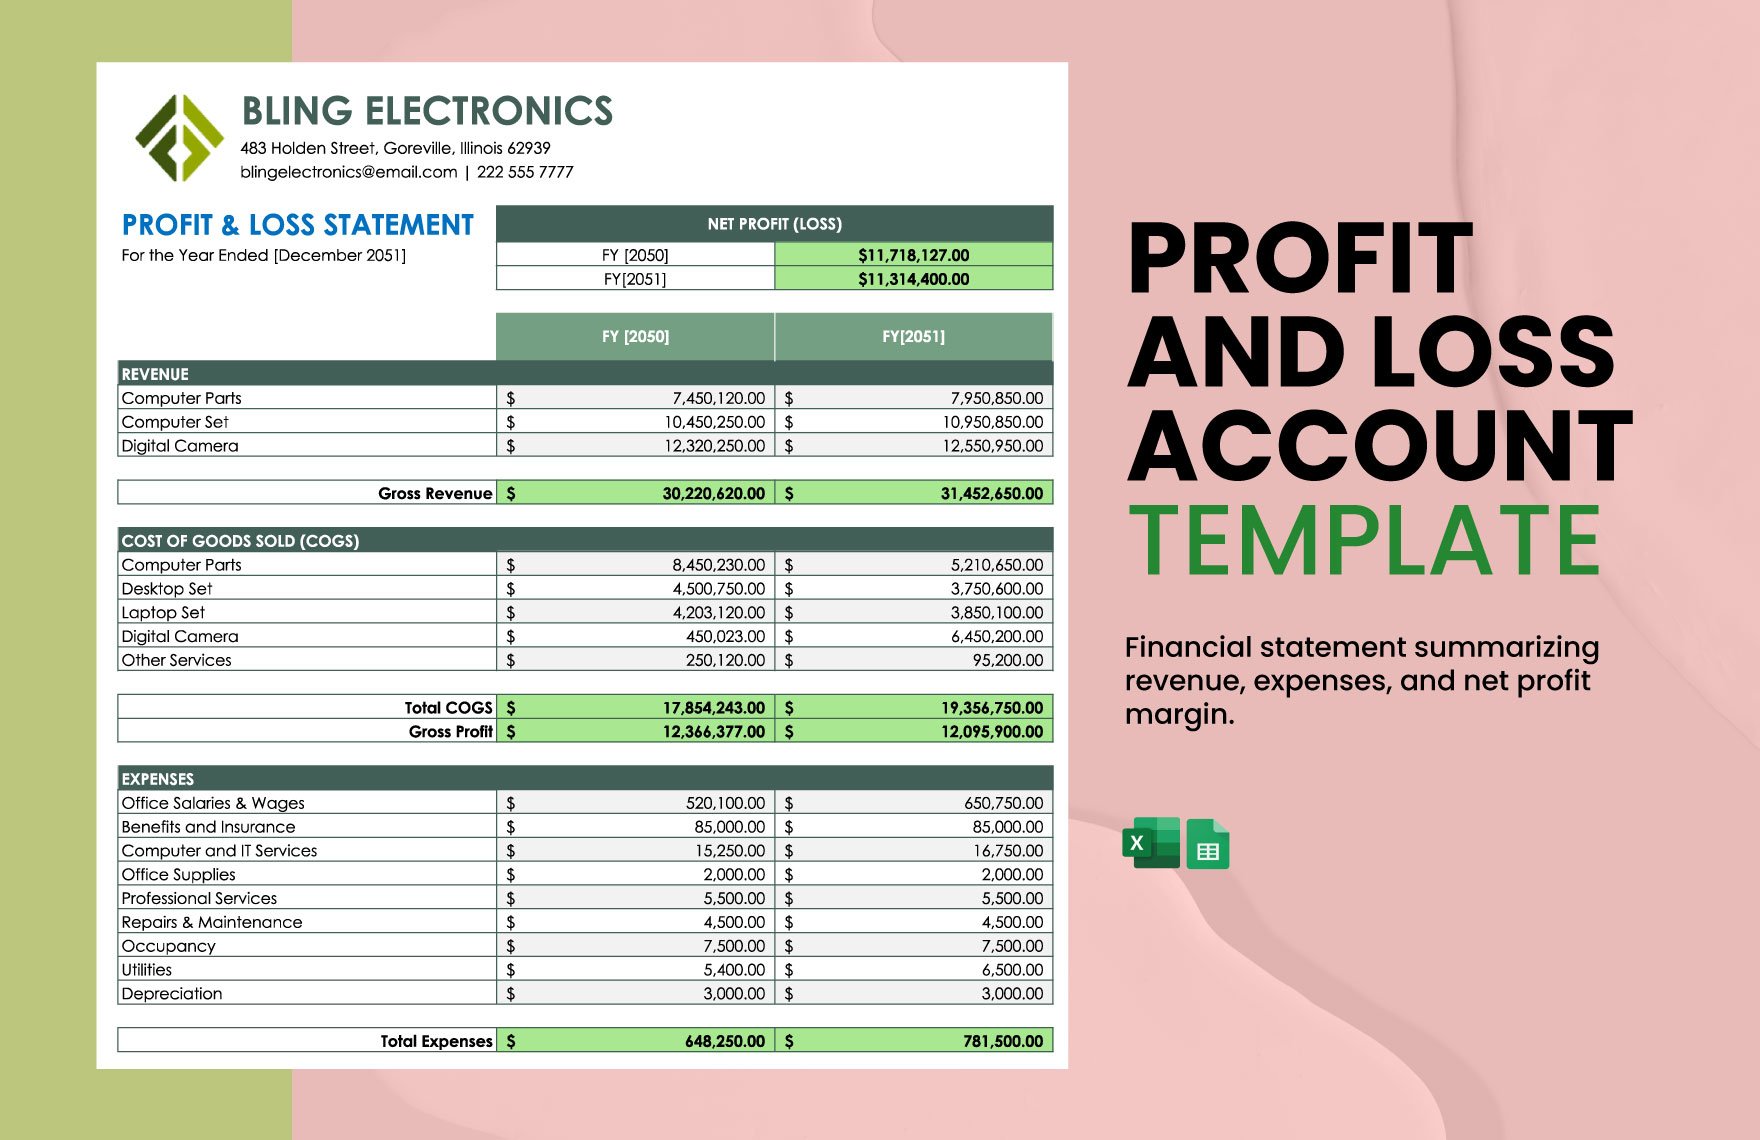 Profit And Loss Account Template